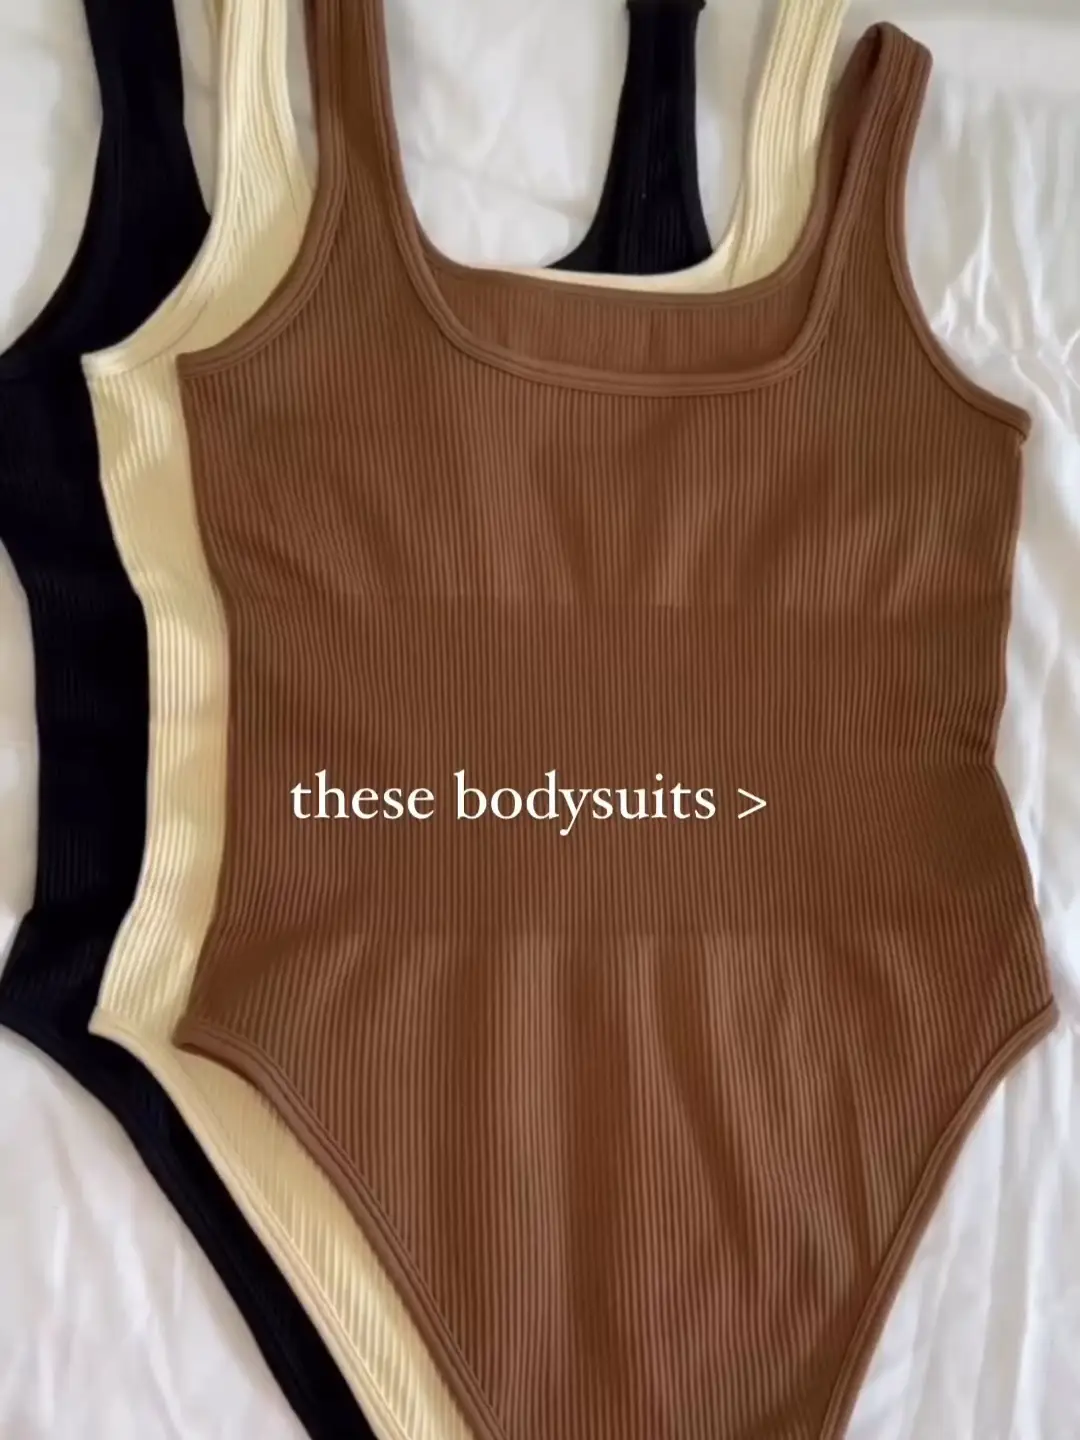 These bodysuits >, Article posted by Ashlei Jarrett